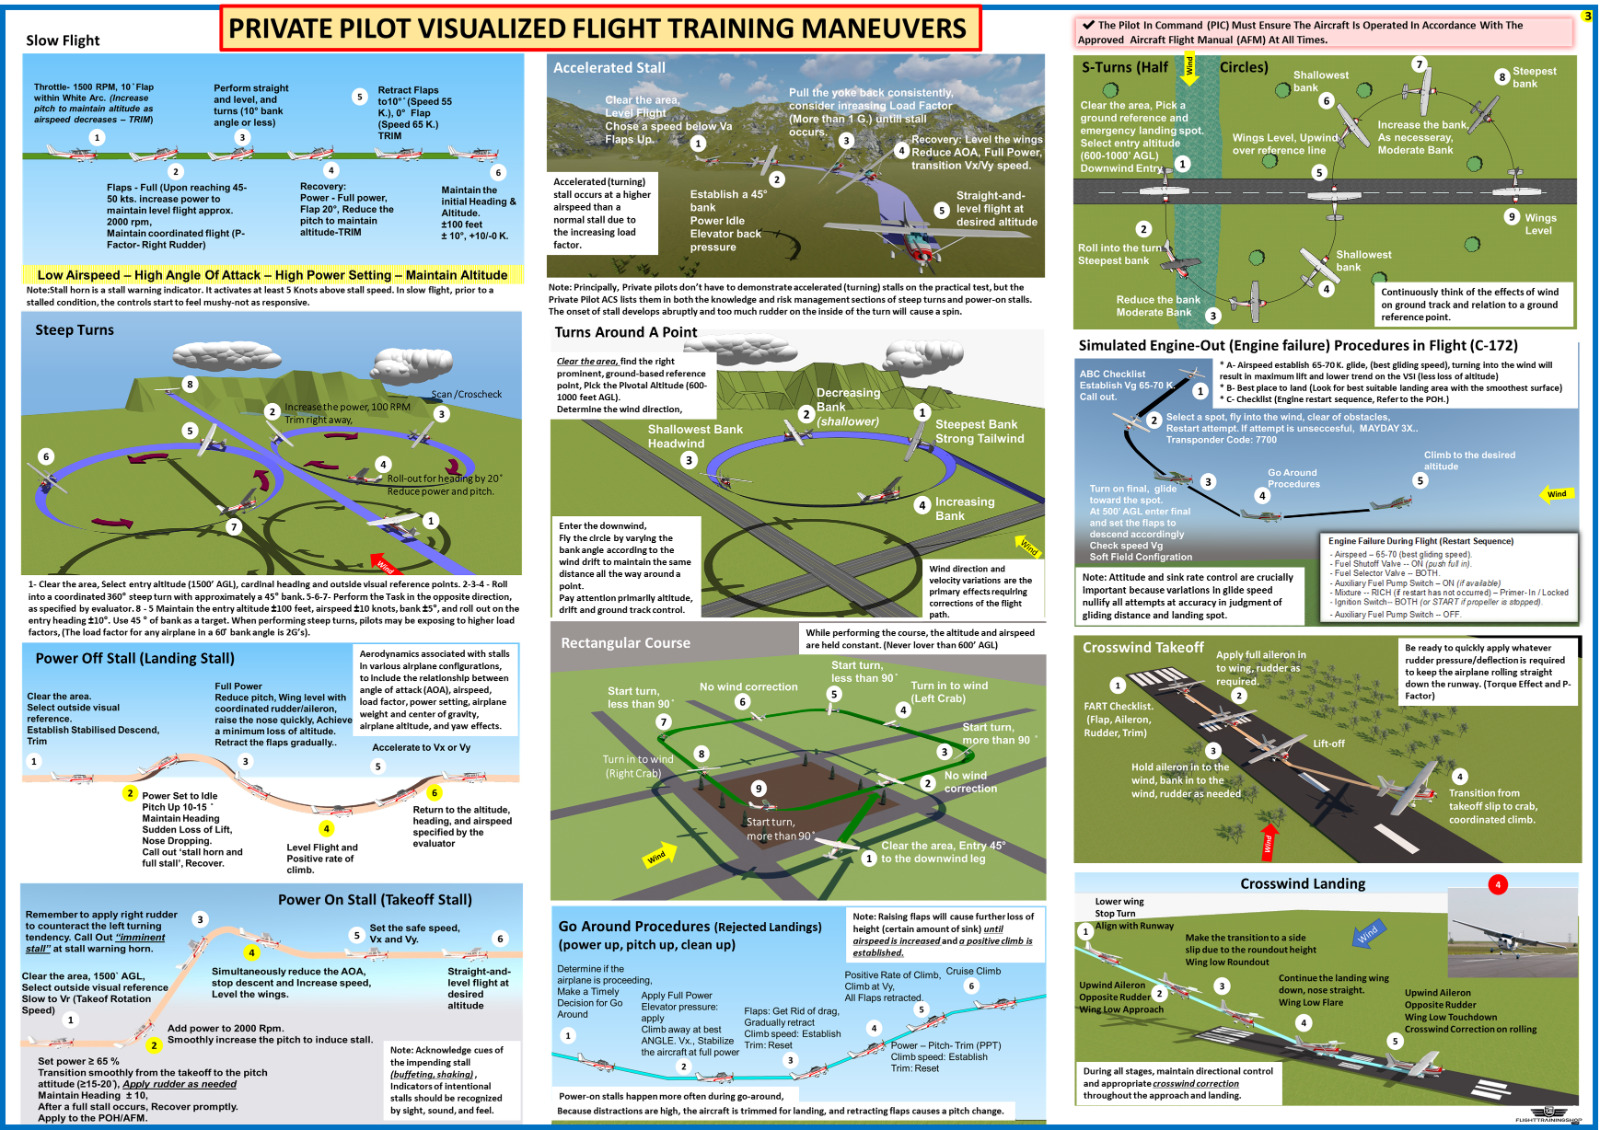 Private Pilot Visualized Flight Maneuvers (Poster, Size 27 x 19 In), ALL IN ONE